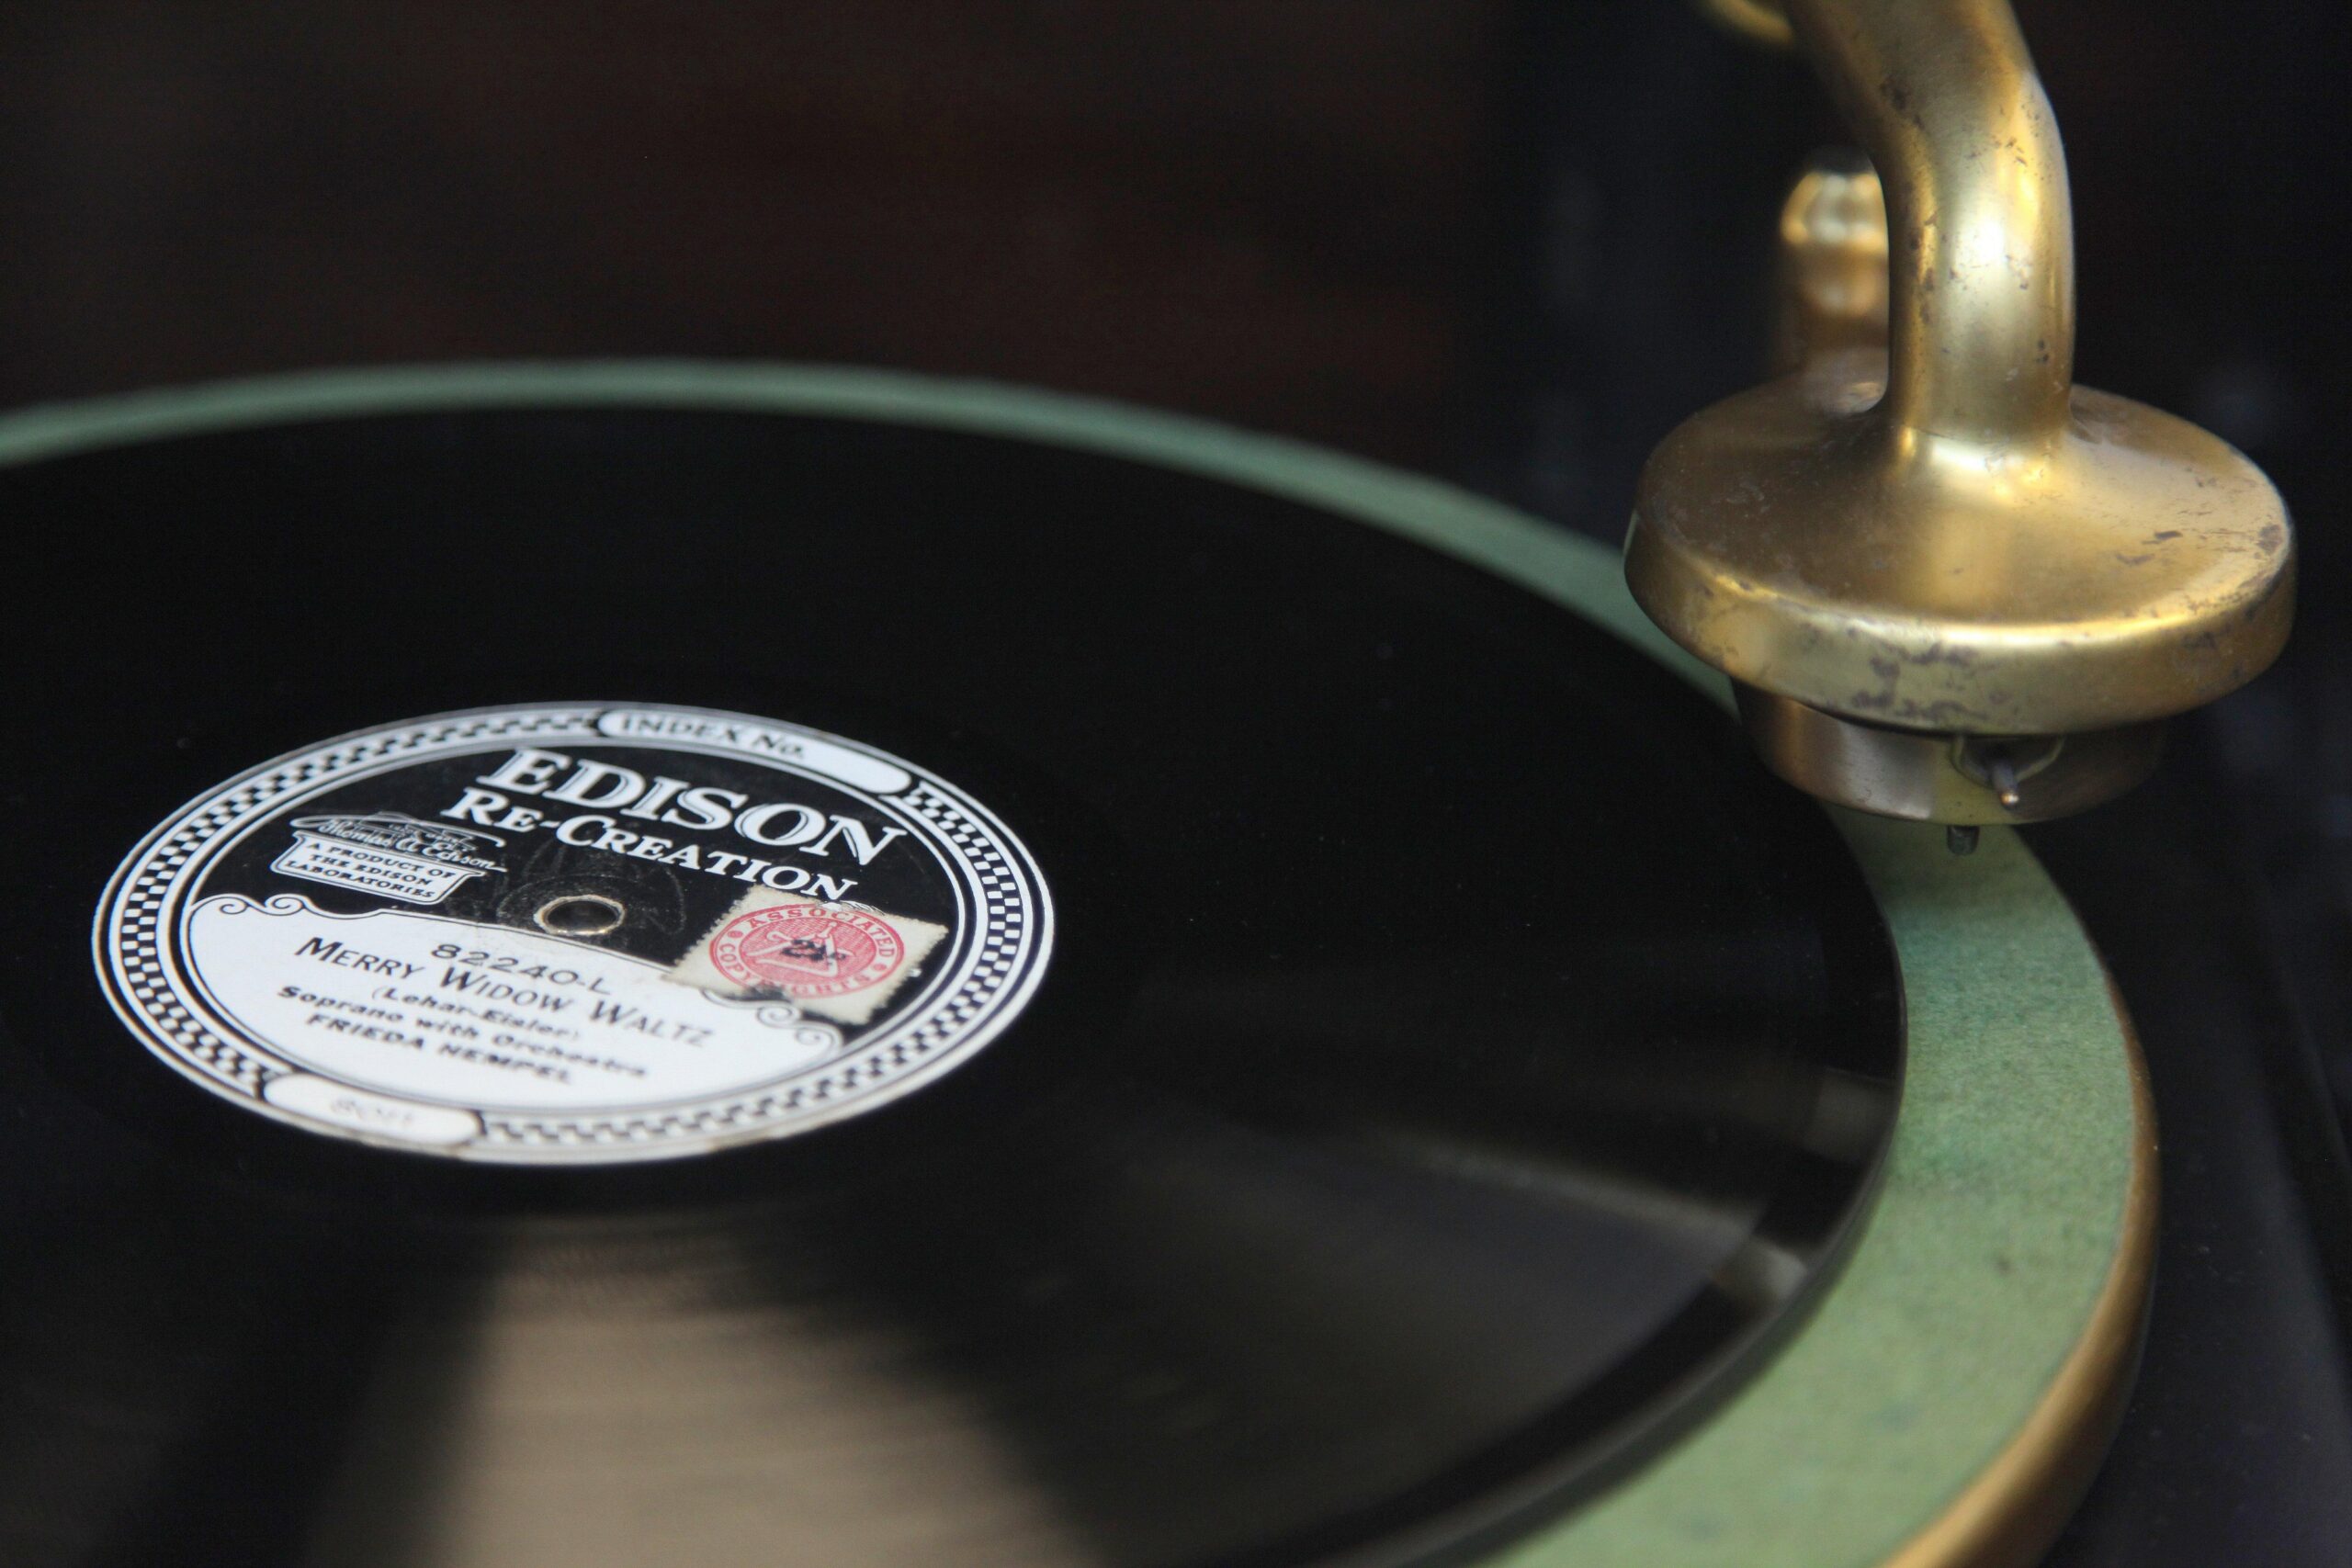 A vintage record player poised for the needle to drop